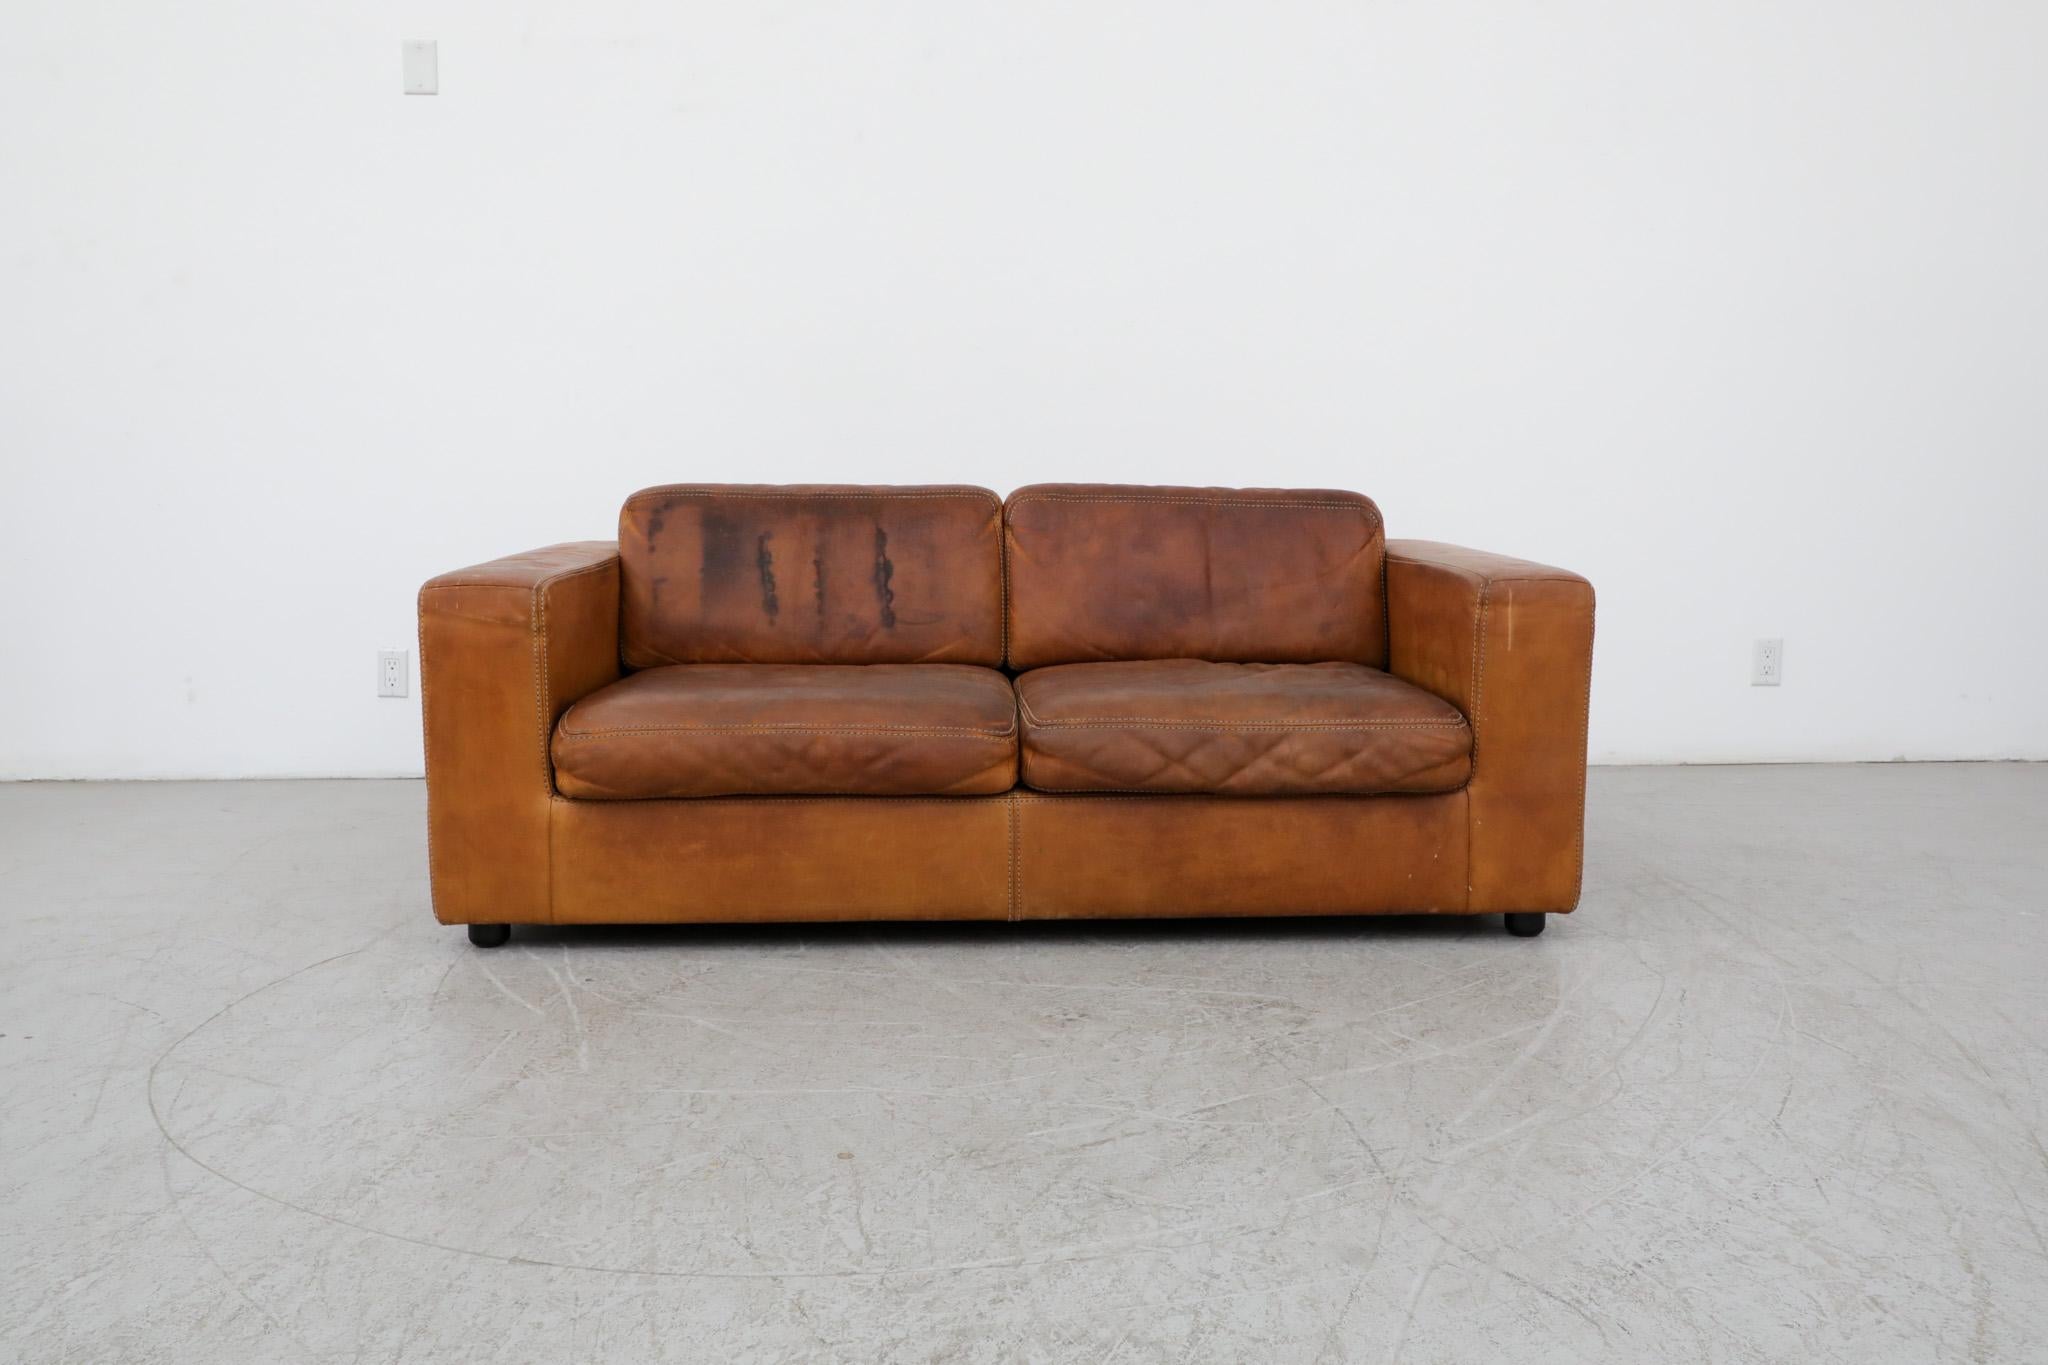 Handsome, Mid-Century two seater natural leather sofa with deep patina. Manufactured by Durlet, Belgium. This comfortable soft form sofa sits low to the ground, and is comprised of thick leather with large stitching. In well loved original condition